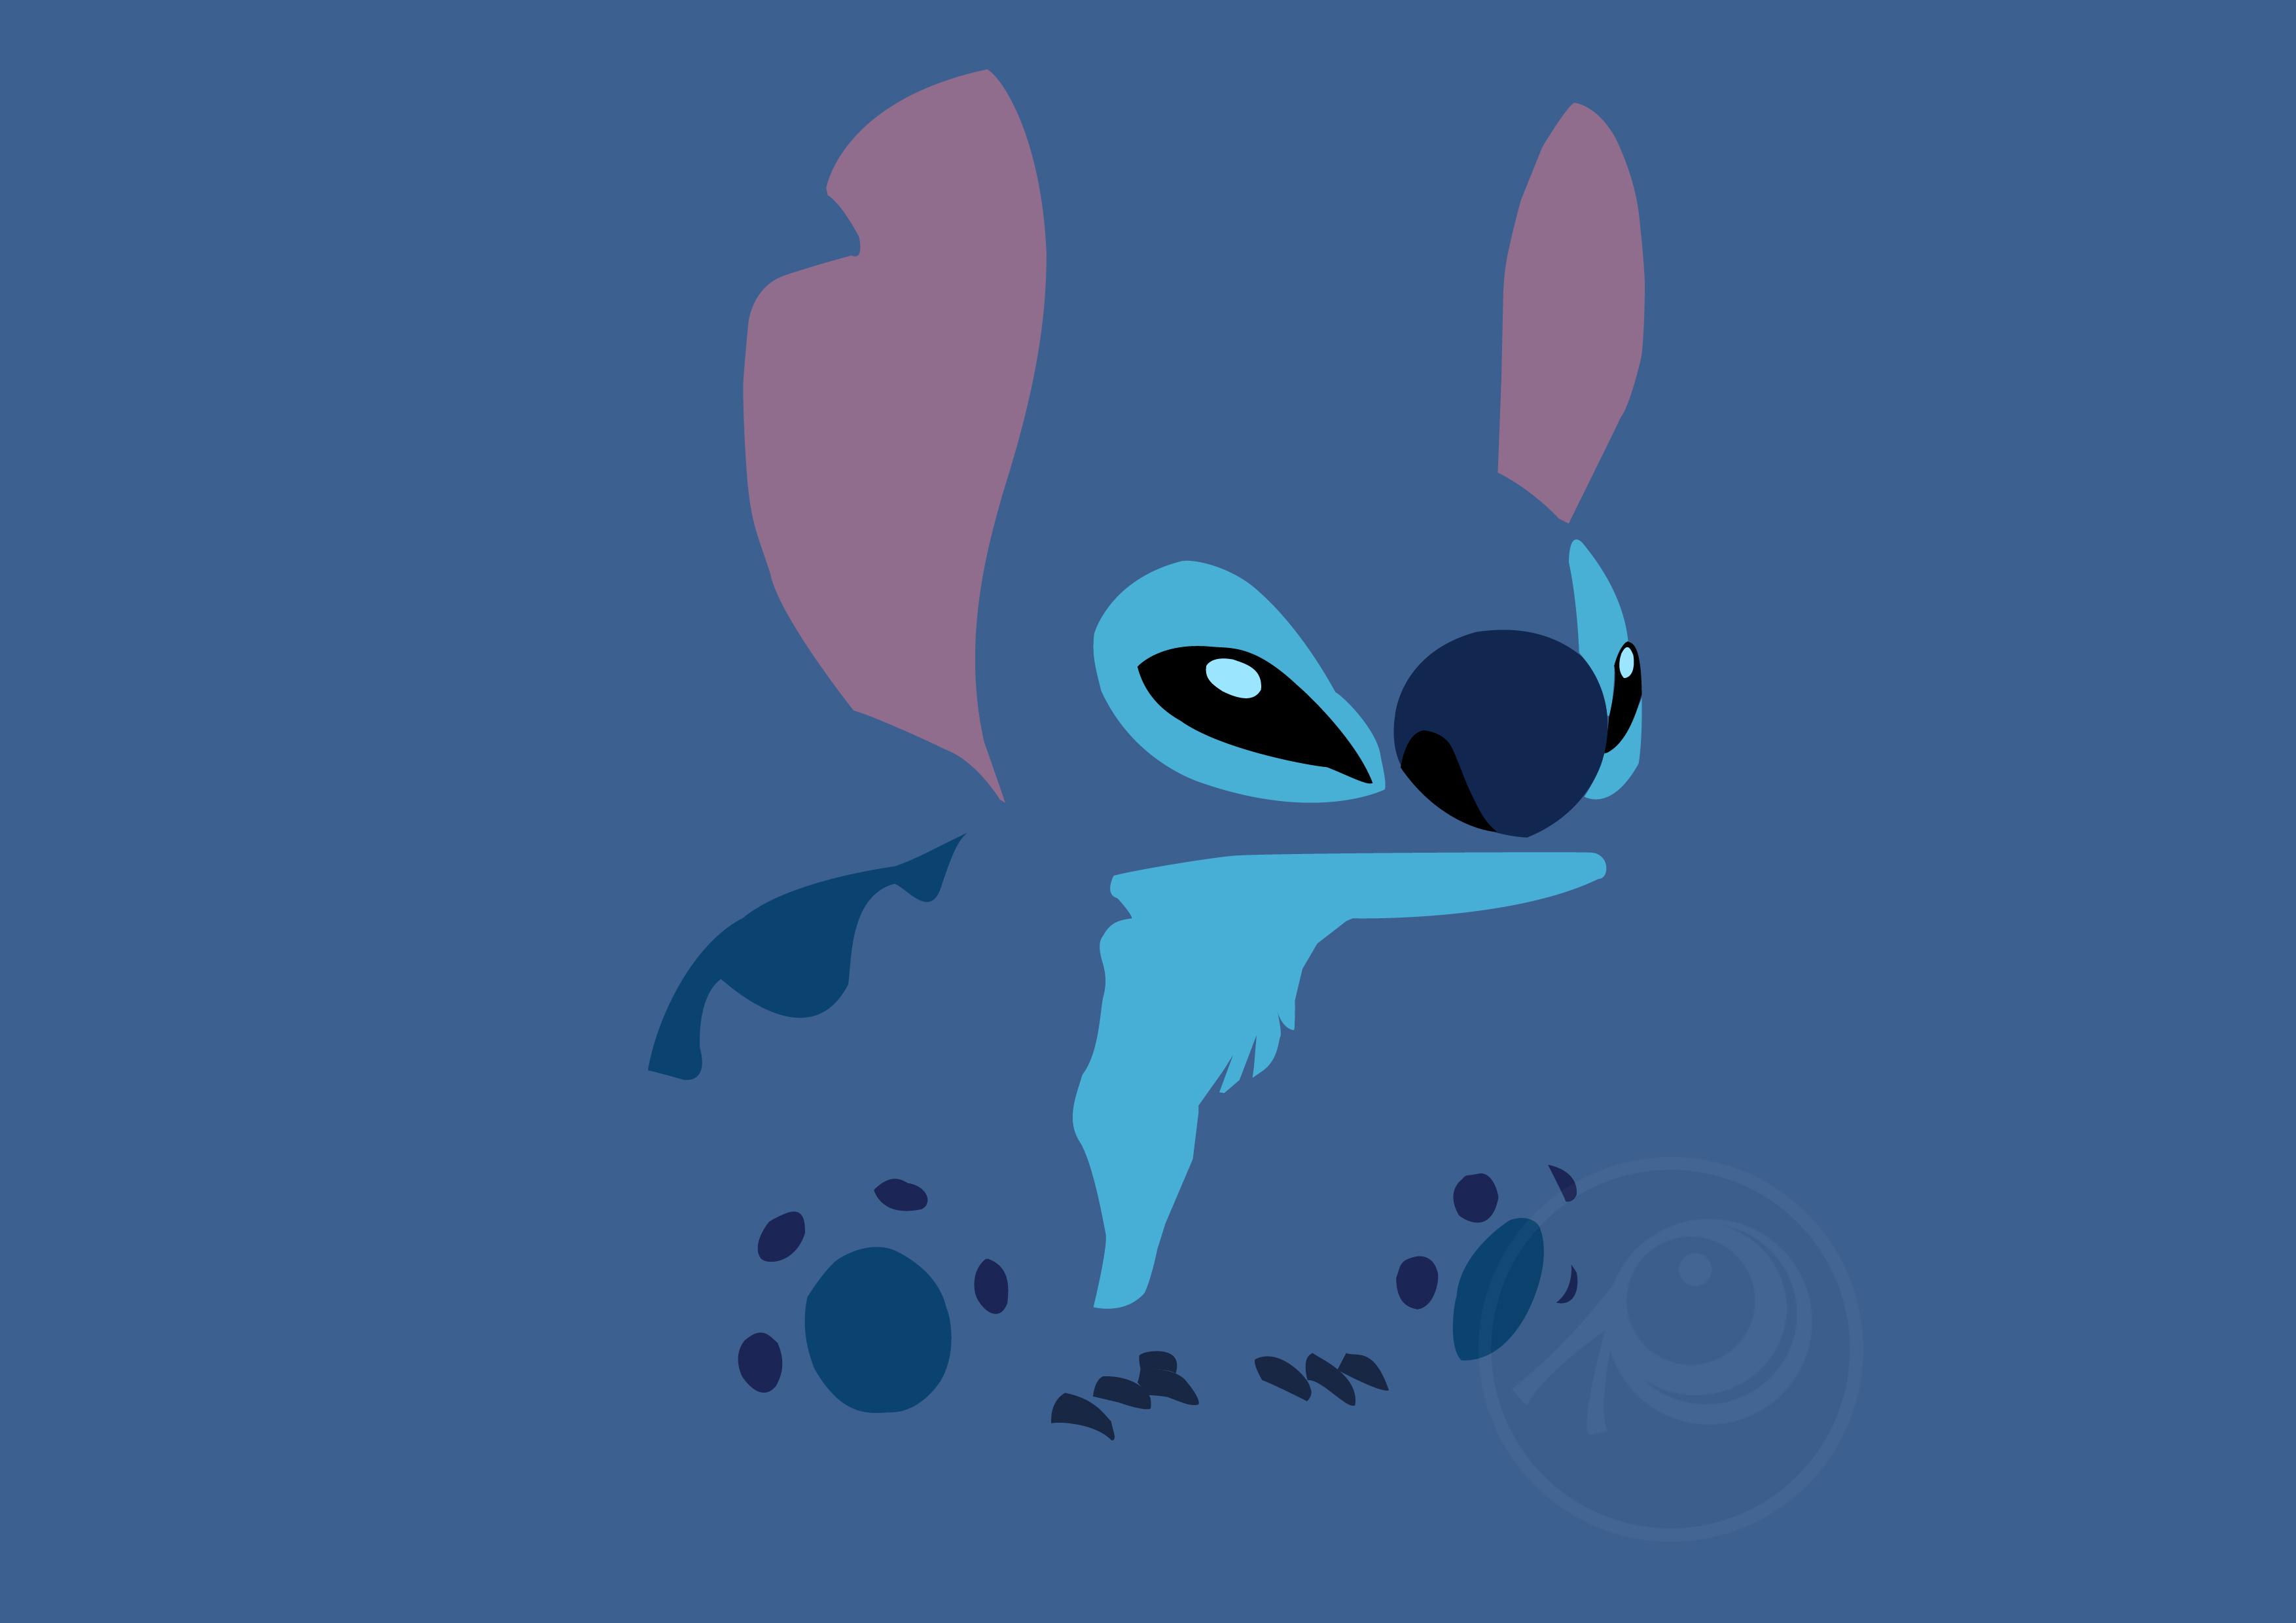 About Lilo and Stitch Wallpapers HD Google Play version   Apptopia